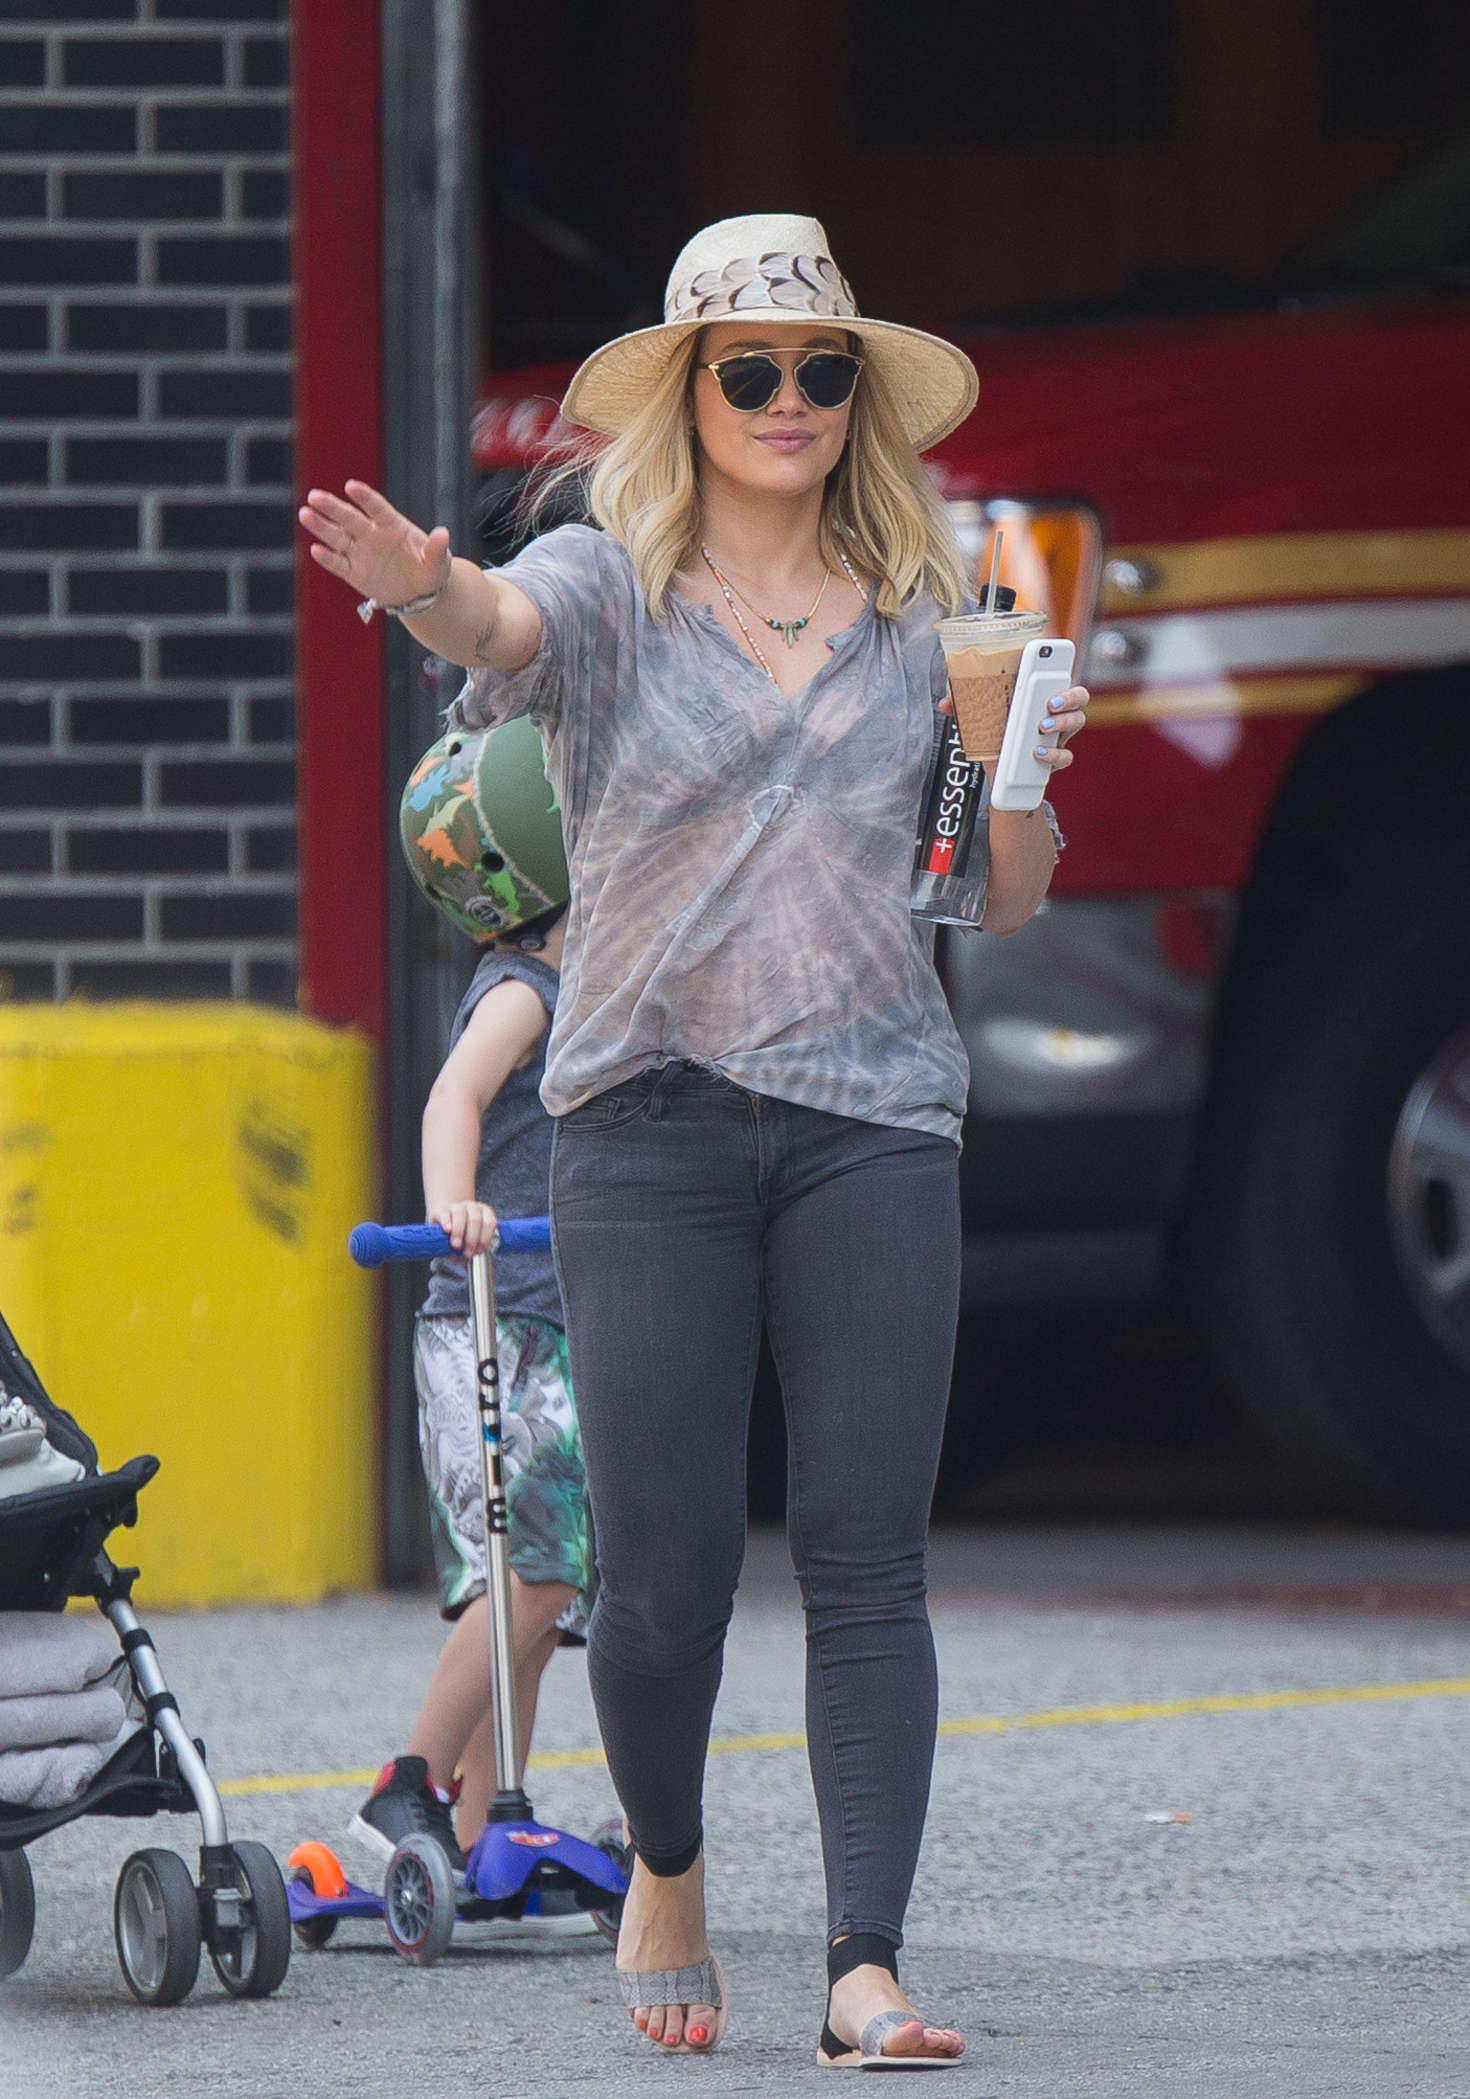 Hilary Duff in Jeans hail a cab in New York City